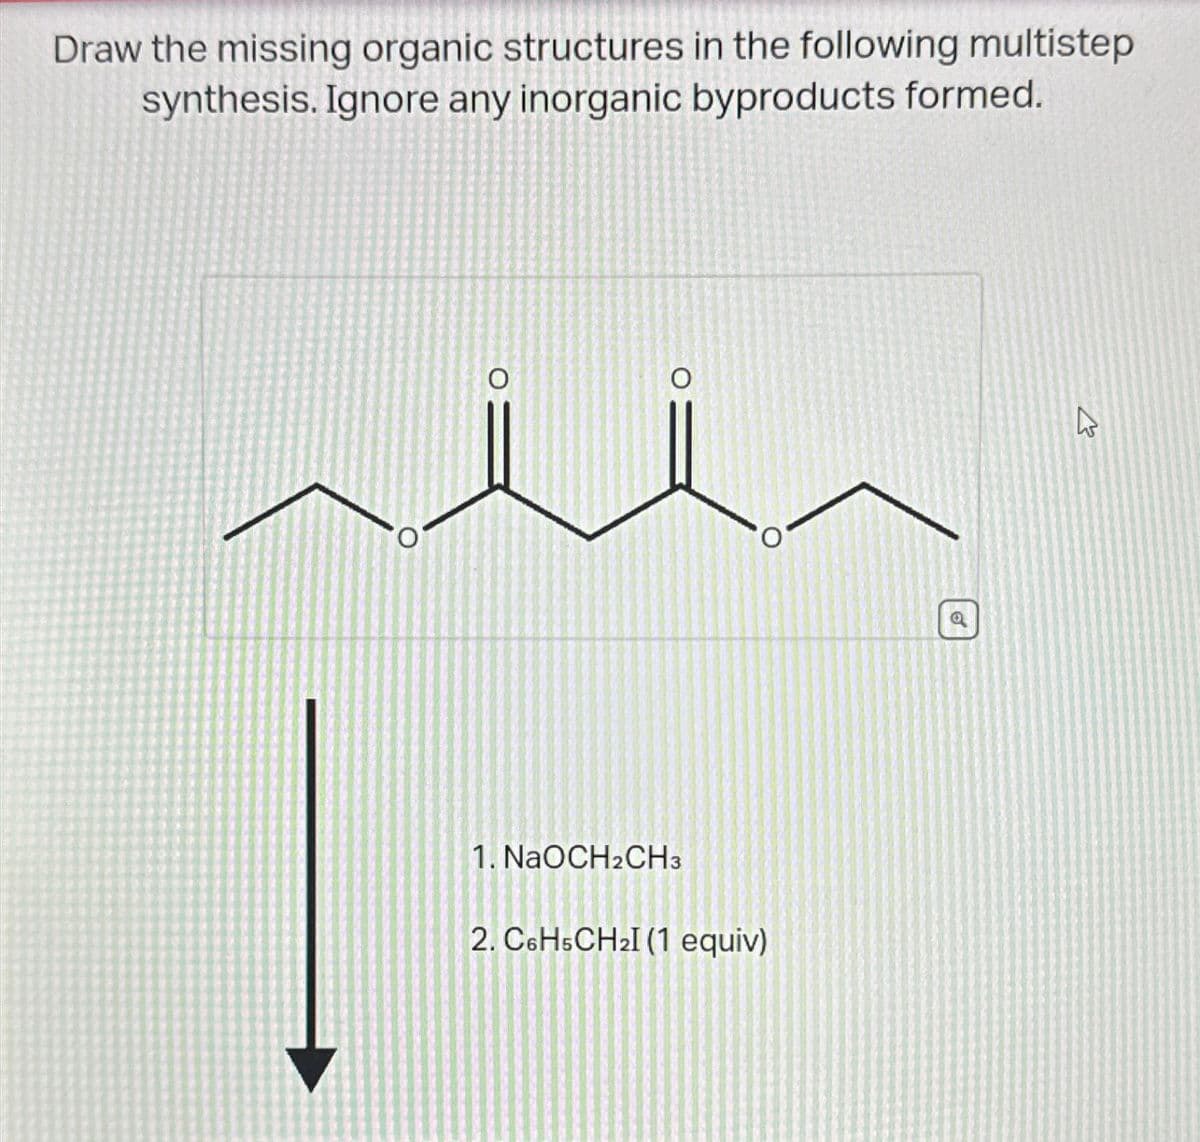 Draw the missing organic structures in the following multistep
synthesis. Ignore any inorganic byproducts formed.
0
O
13
1. NaOCH2CH3
2. C6H5CH2I (1 equiv)